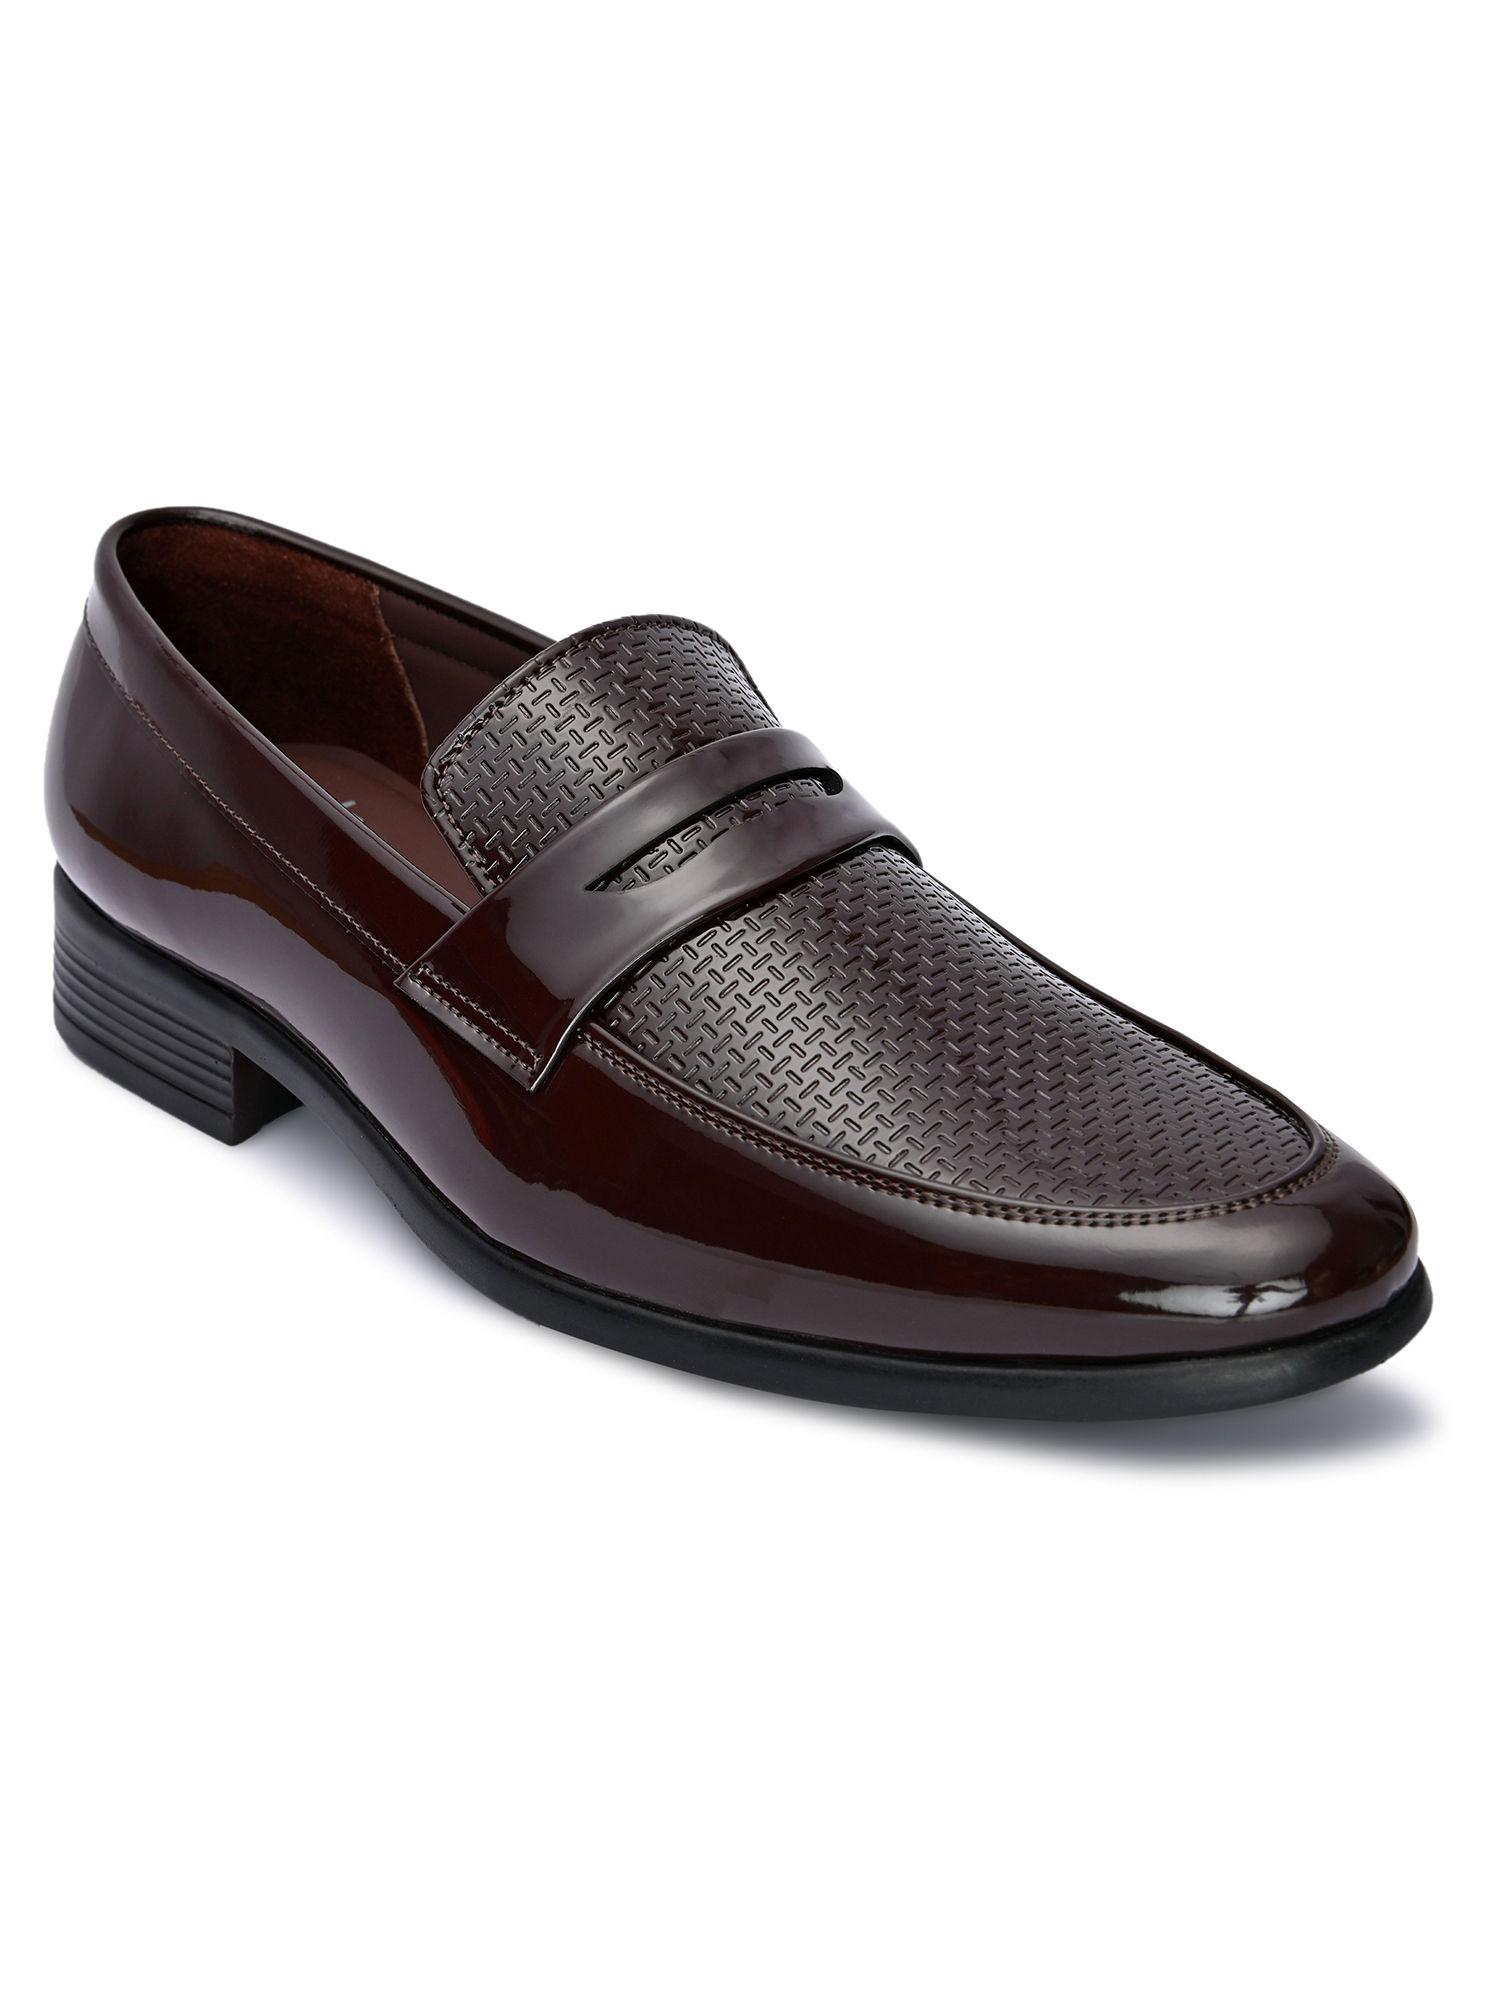 brown textured formal loafers